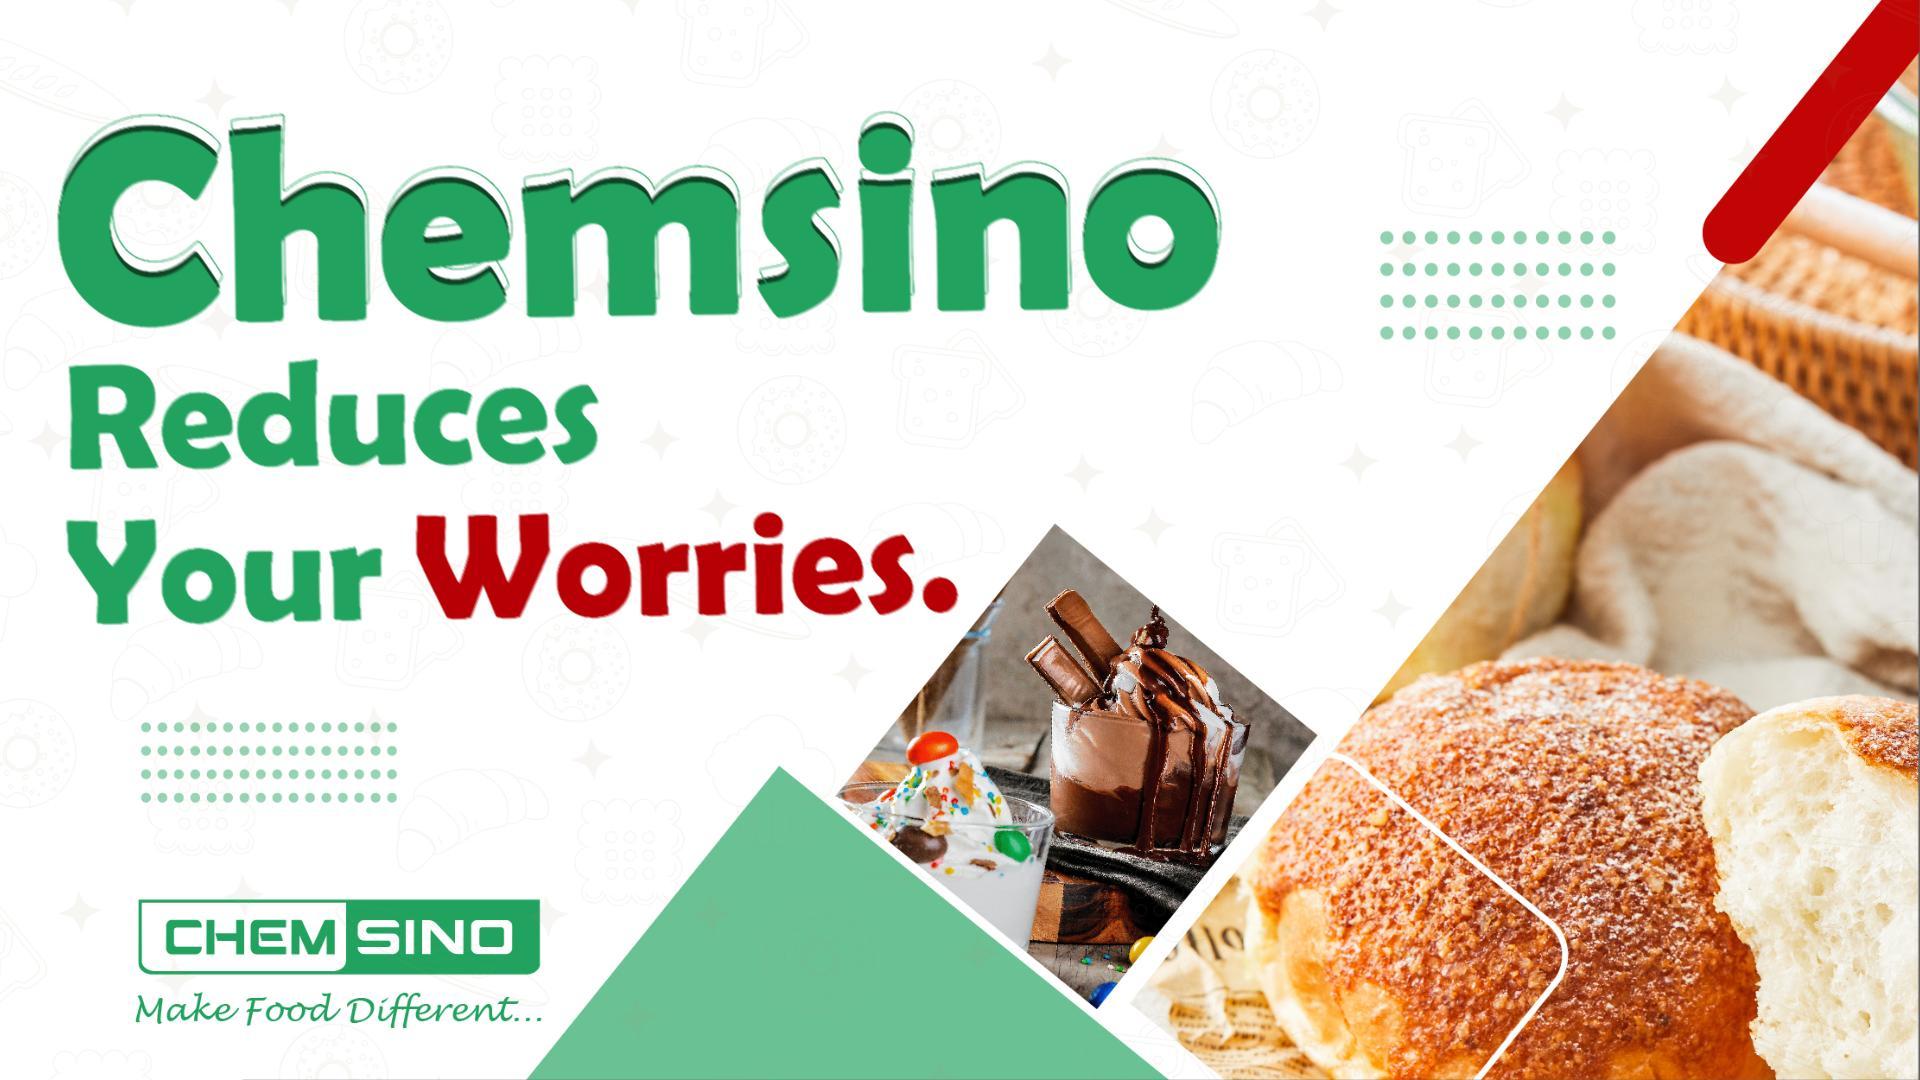 Chemsino reduces your worries